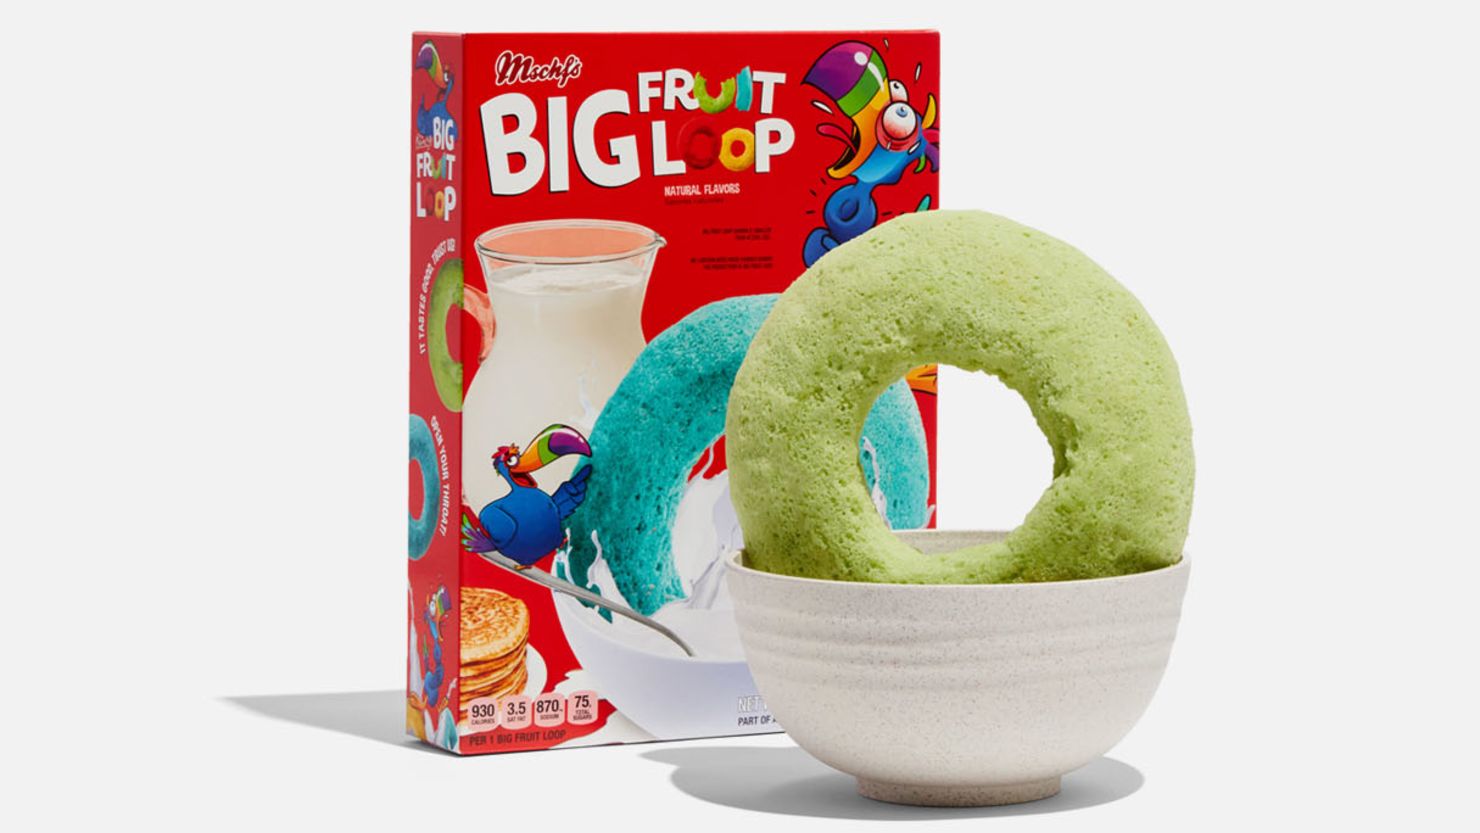 The hottest holiday gift is a massive, half pound Fruit Loop